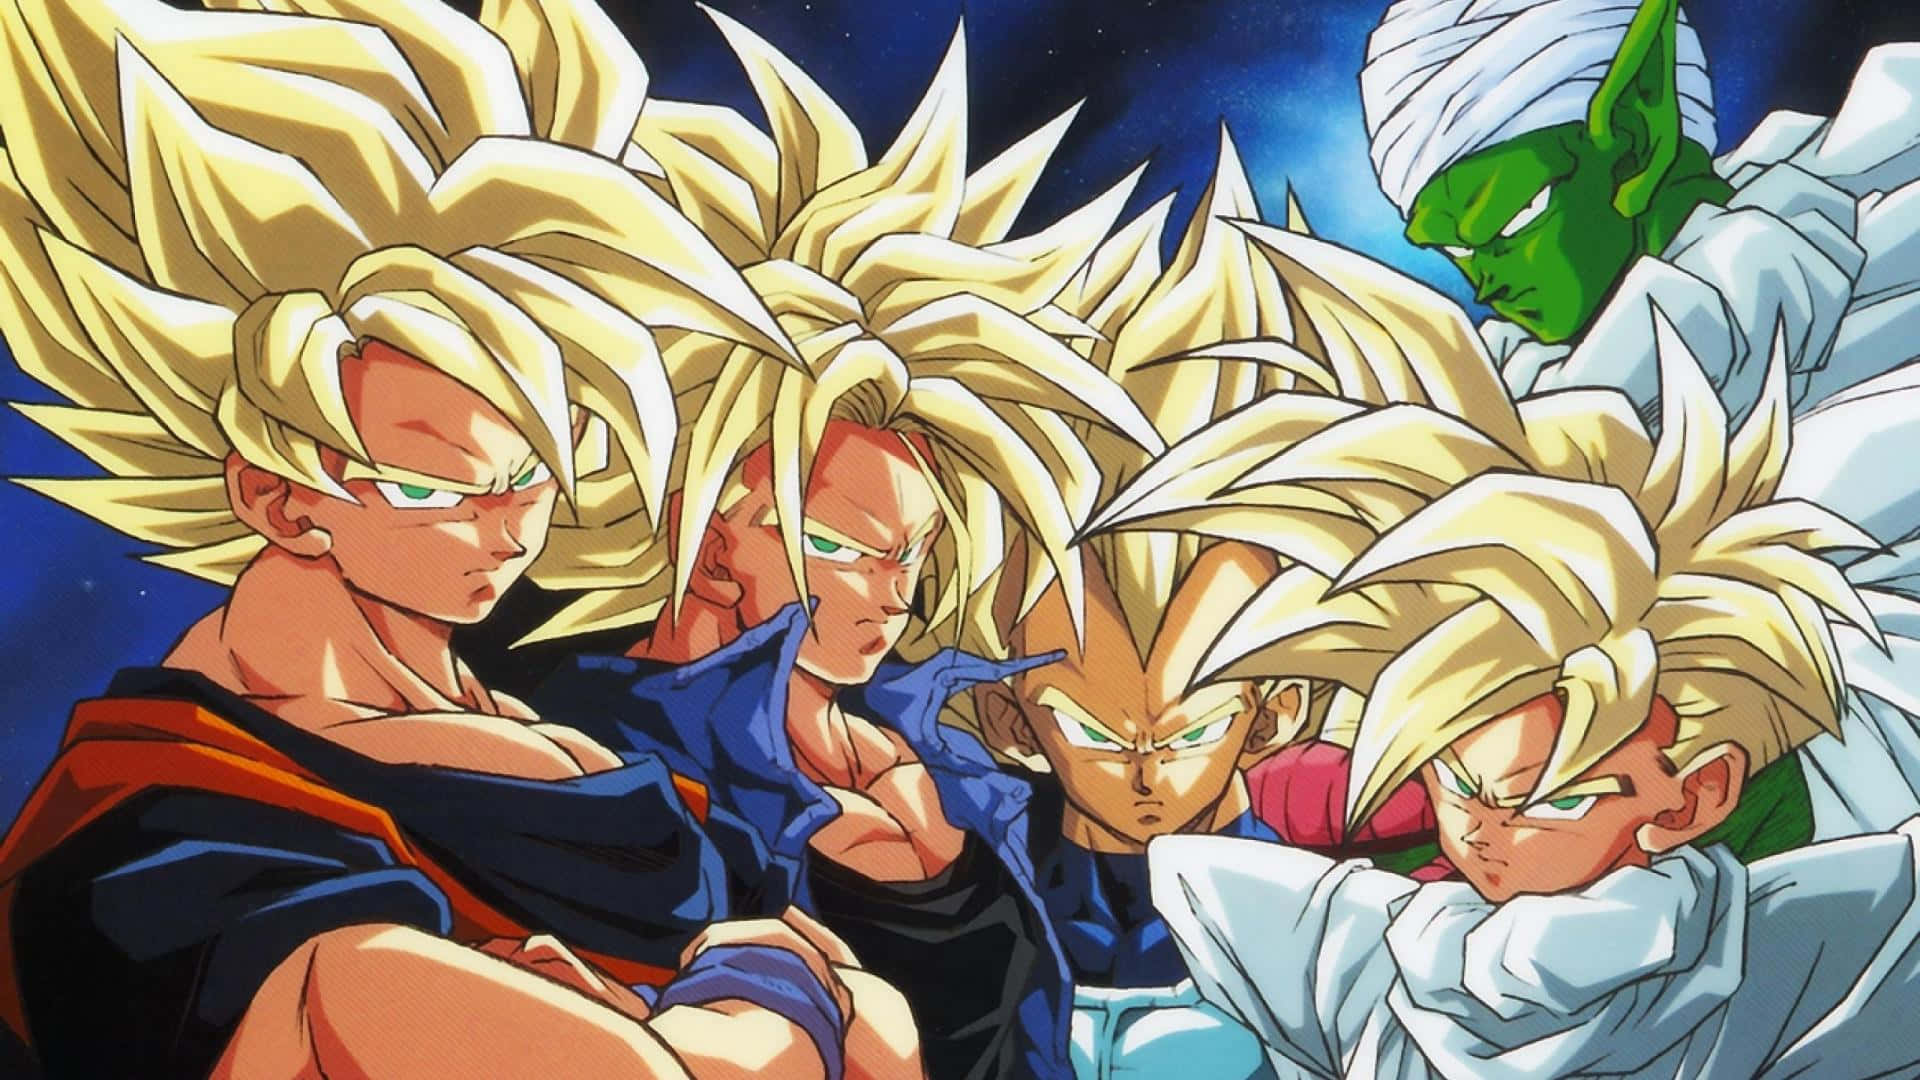 Dragon Ball Z characters pose confidently on a rocky landscape. Wallpaper